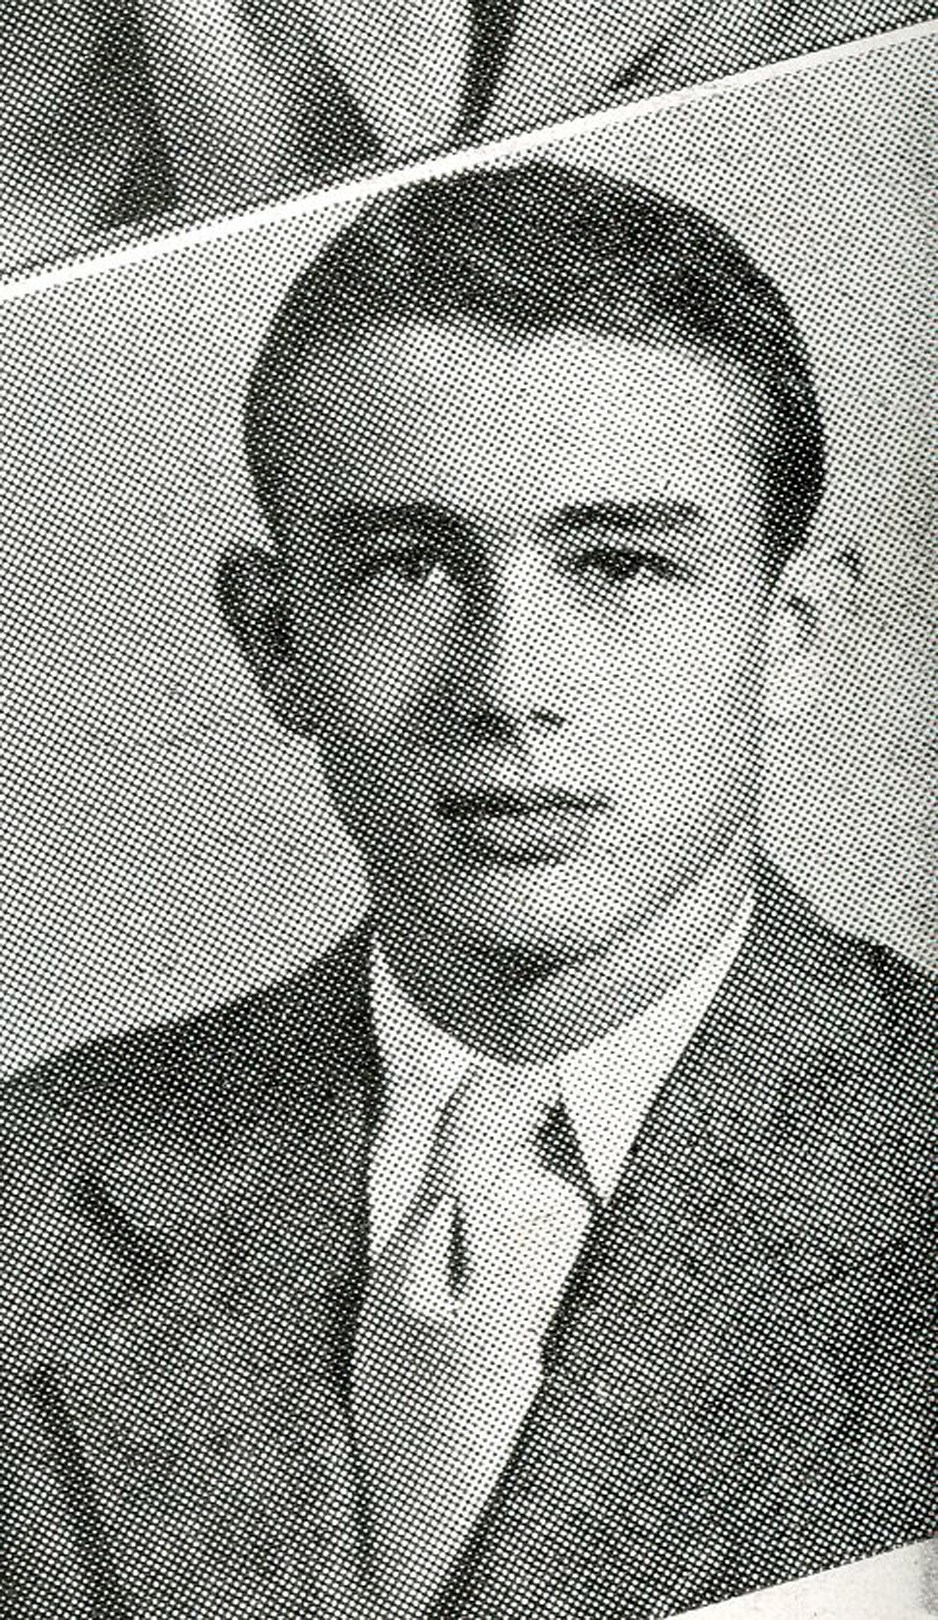 Rock And Pop Culture - 1949 James Dean High School Yearbook (ex-Seth Poppel Yearbook Library)